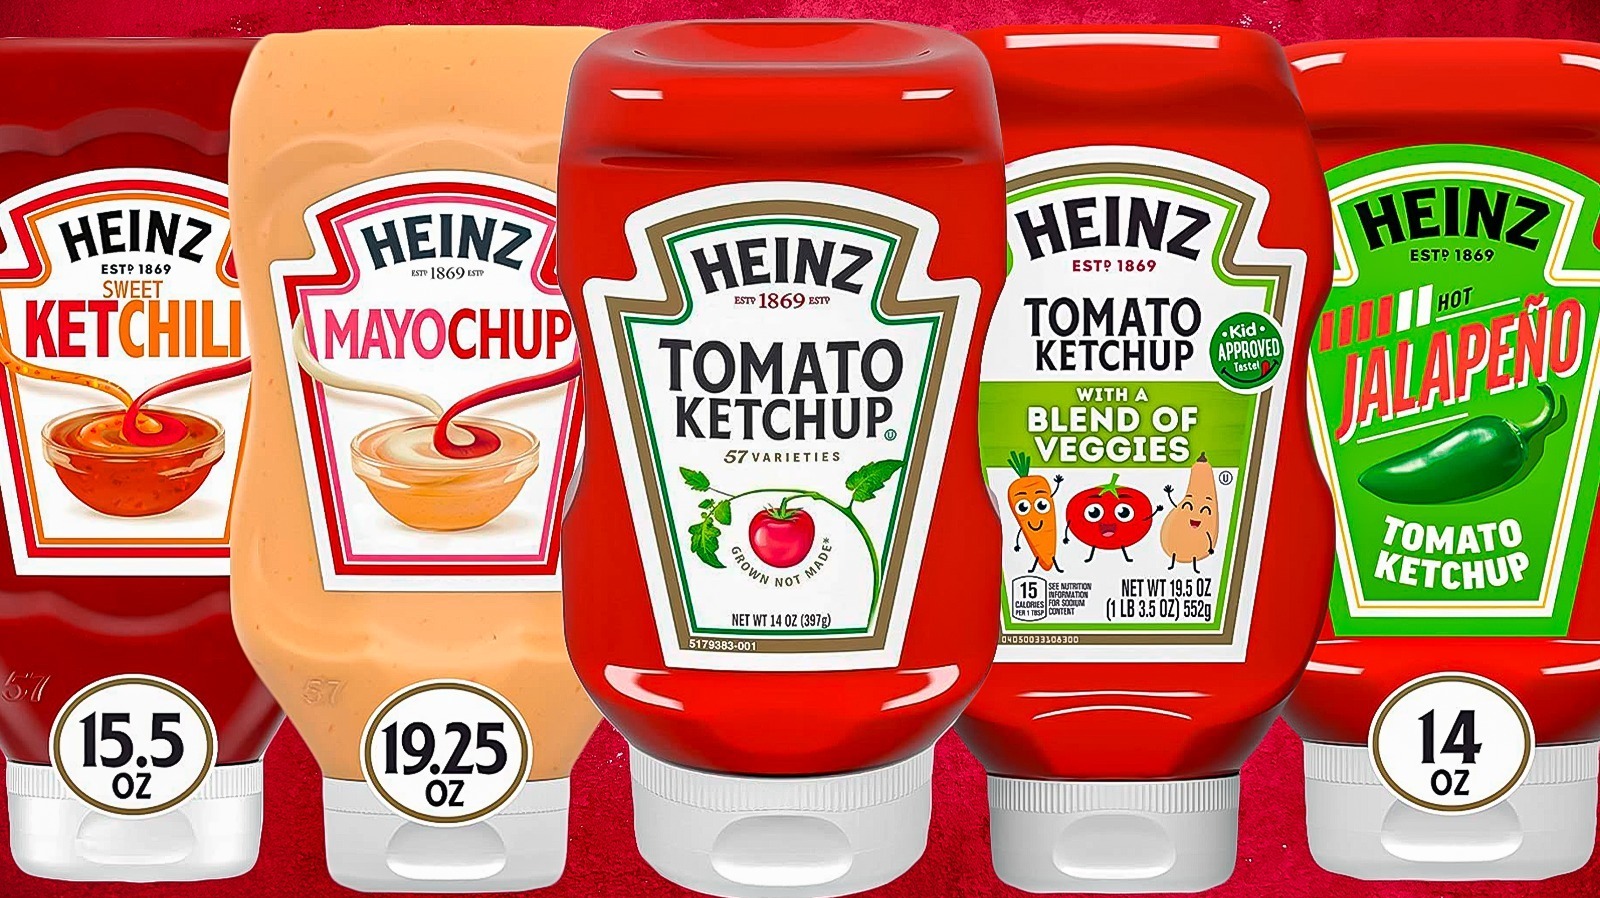 Heinz Ketchup Flavors Ranked Worst To Best - Mashed - TrendRadars